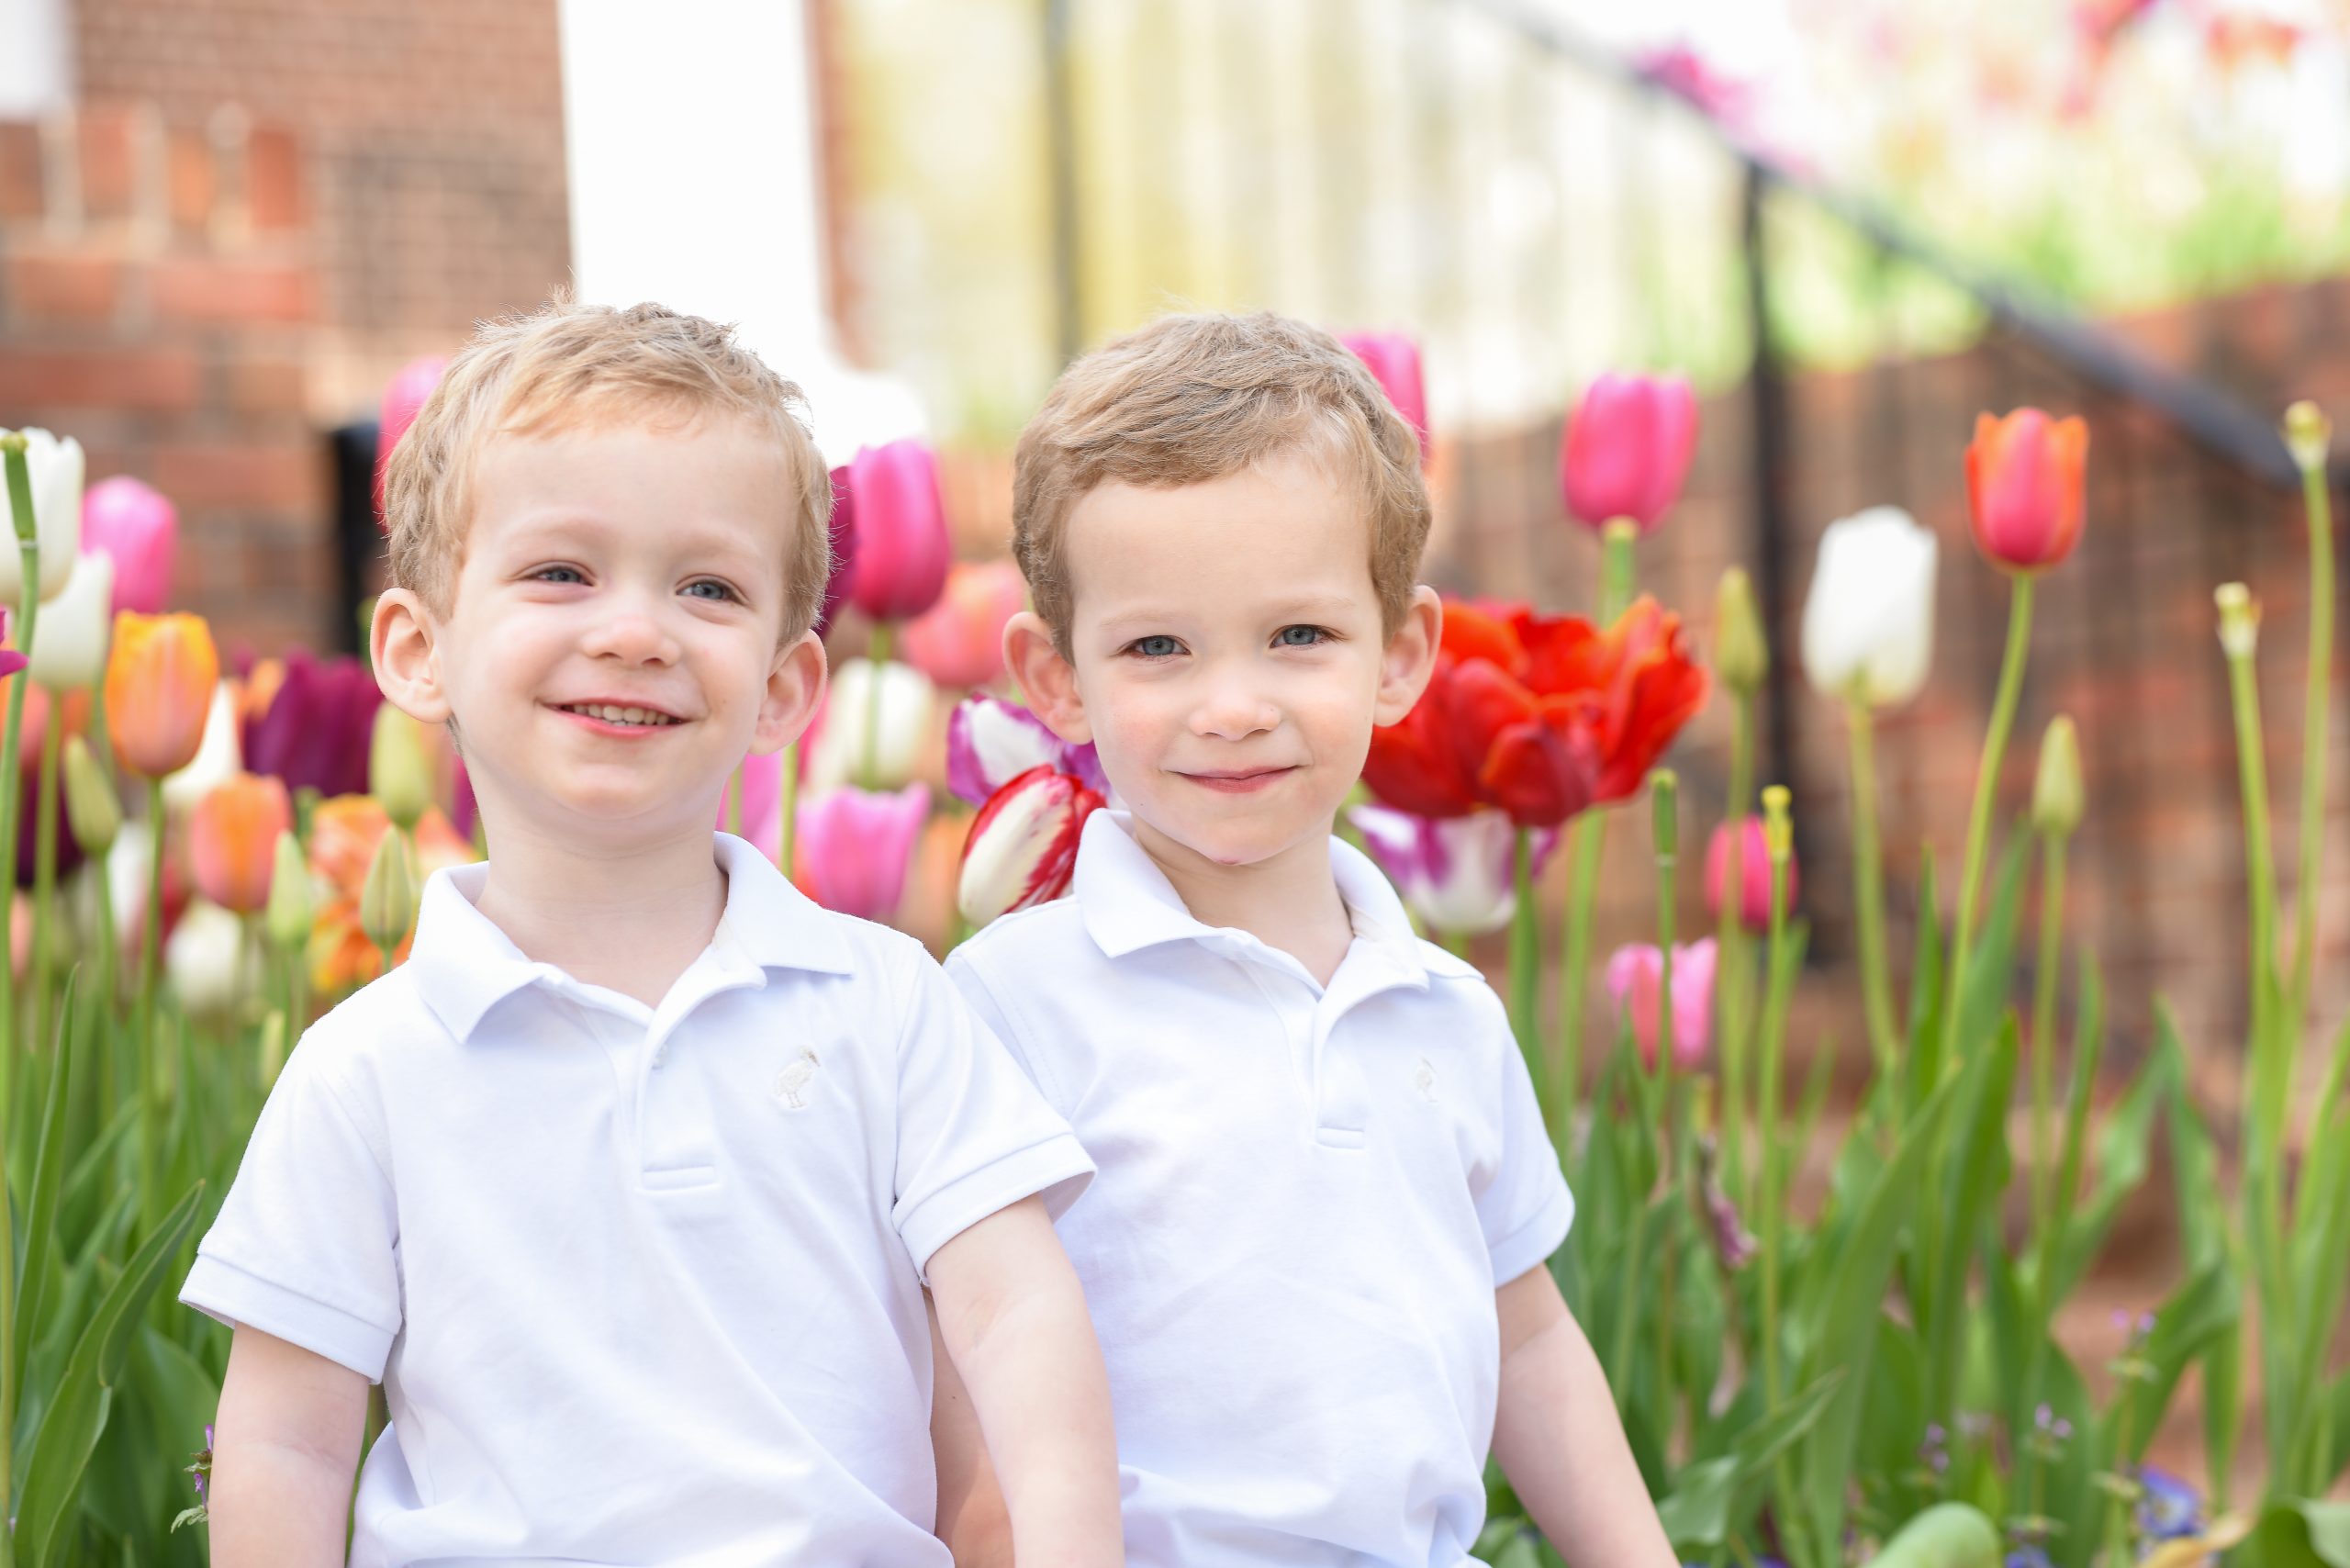 Having monozygotic (identical) twins is not genetic, but MZ twins are natural clones of each other, each with the exact same genetic makeup as the other. Because fingerprints are uniquely formed by the fetus pressing their fingers in the womb, however, they do not share matching fingerprints. Identical twins McLain and Graham Earhardt, at age 3.   Photography courtesy of Heather Gallagher
